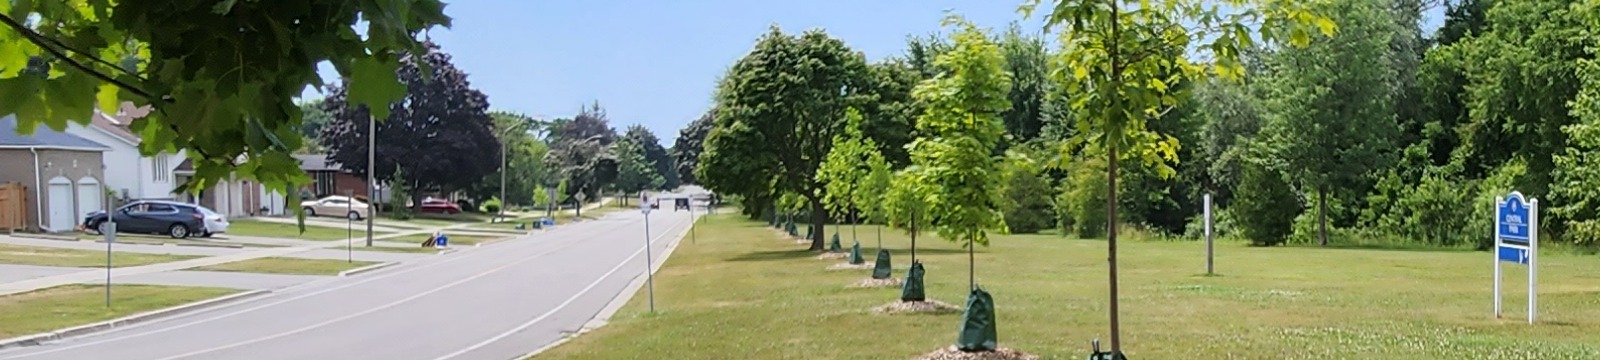 Newly planted trees along Central Park